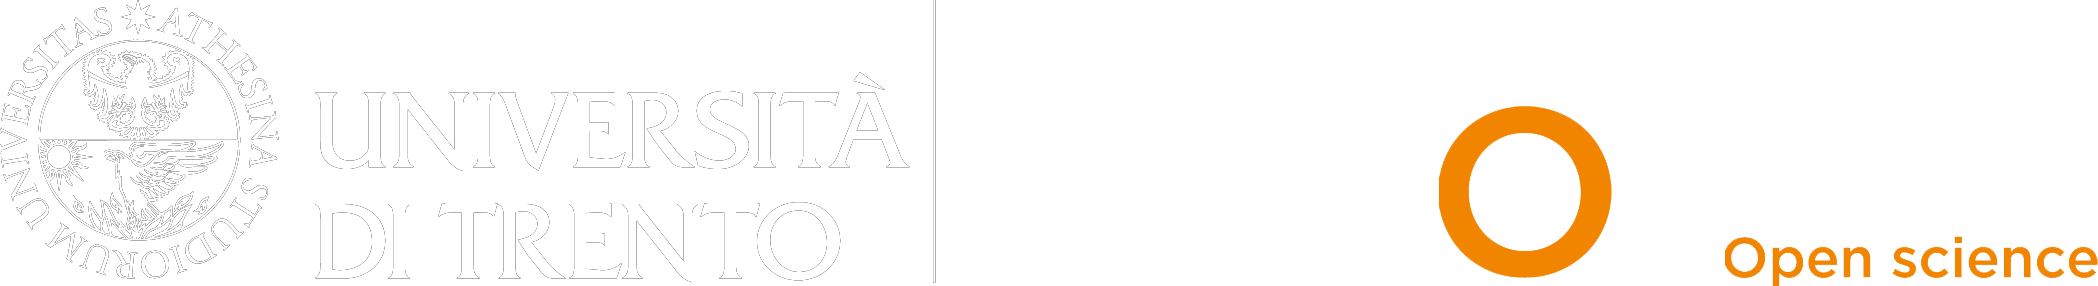 Logo of TESeO - Trento Editions Service for Open science